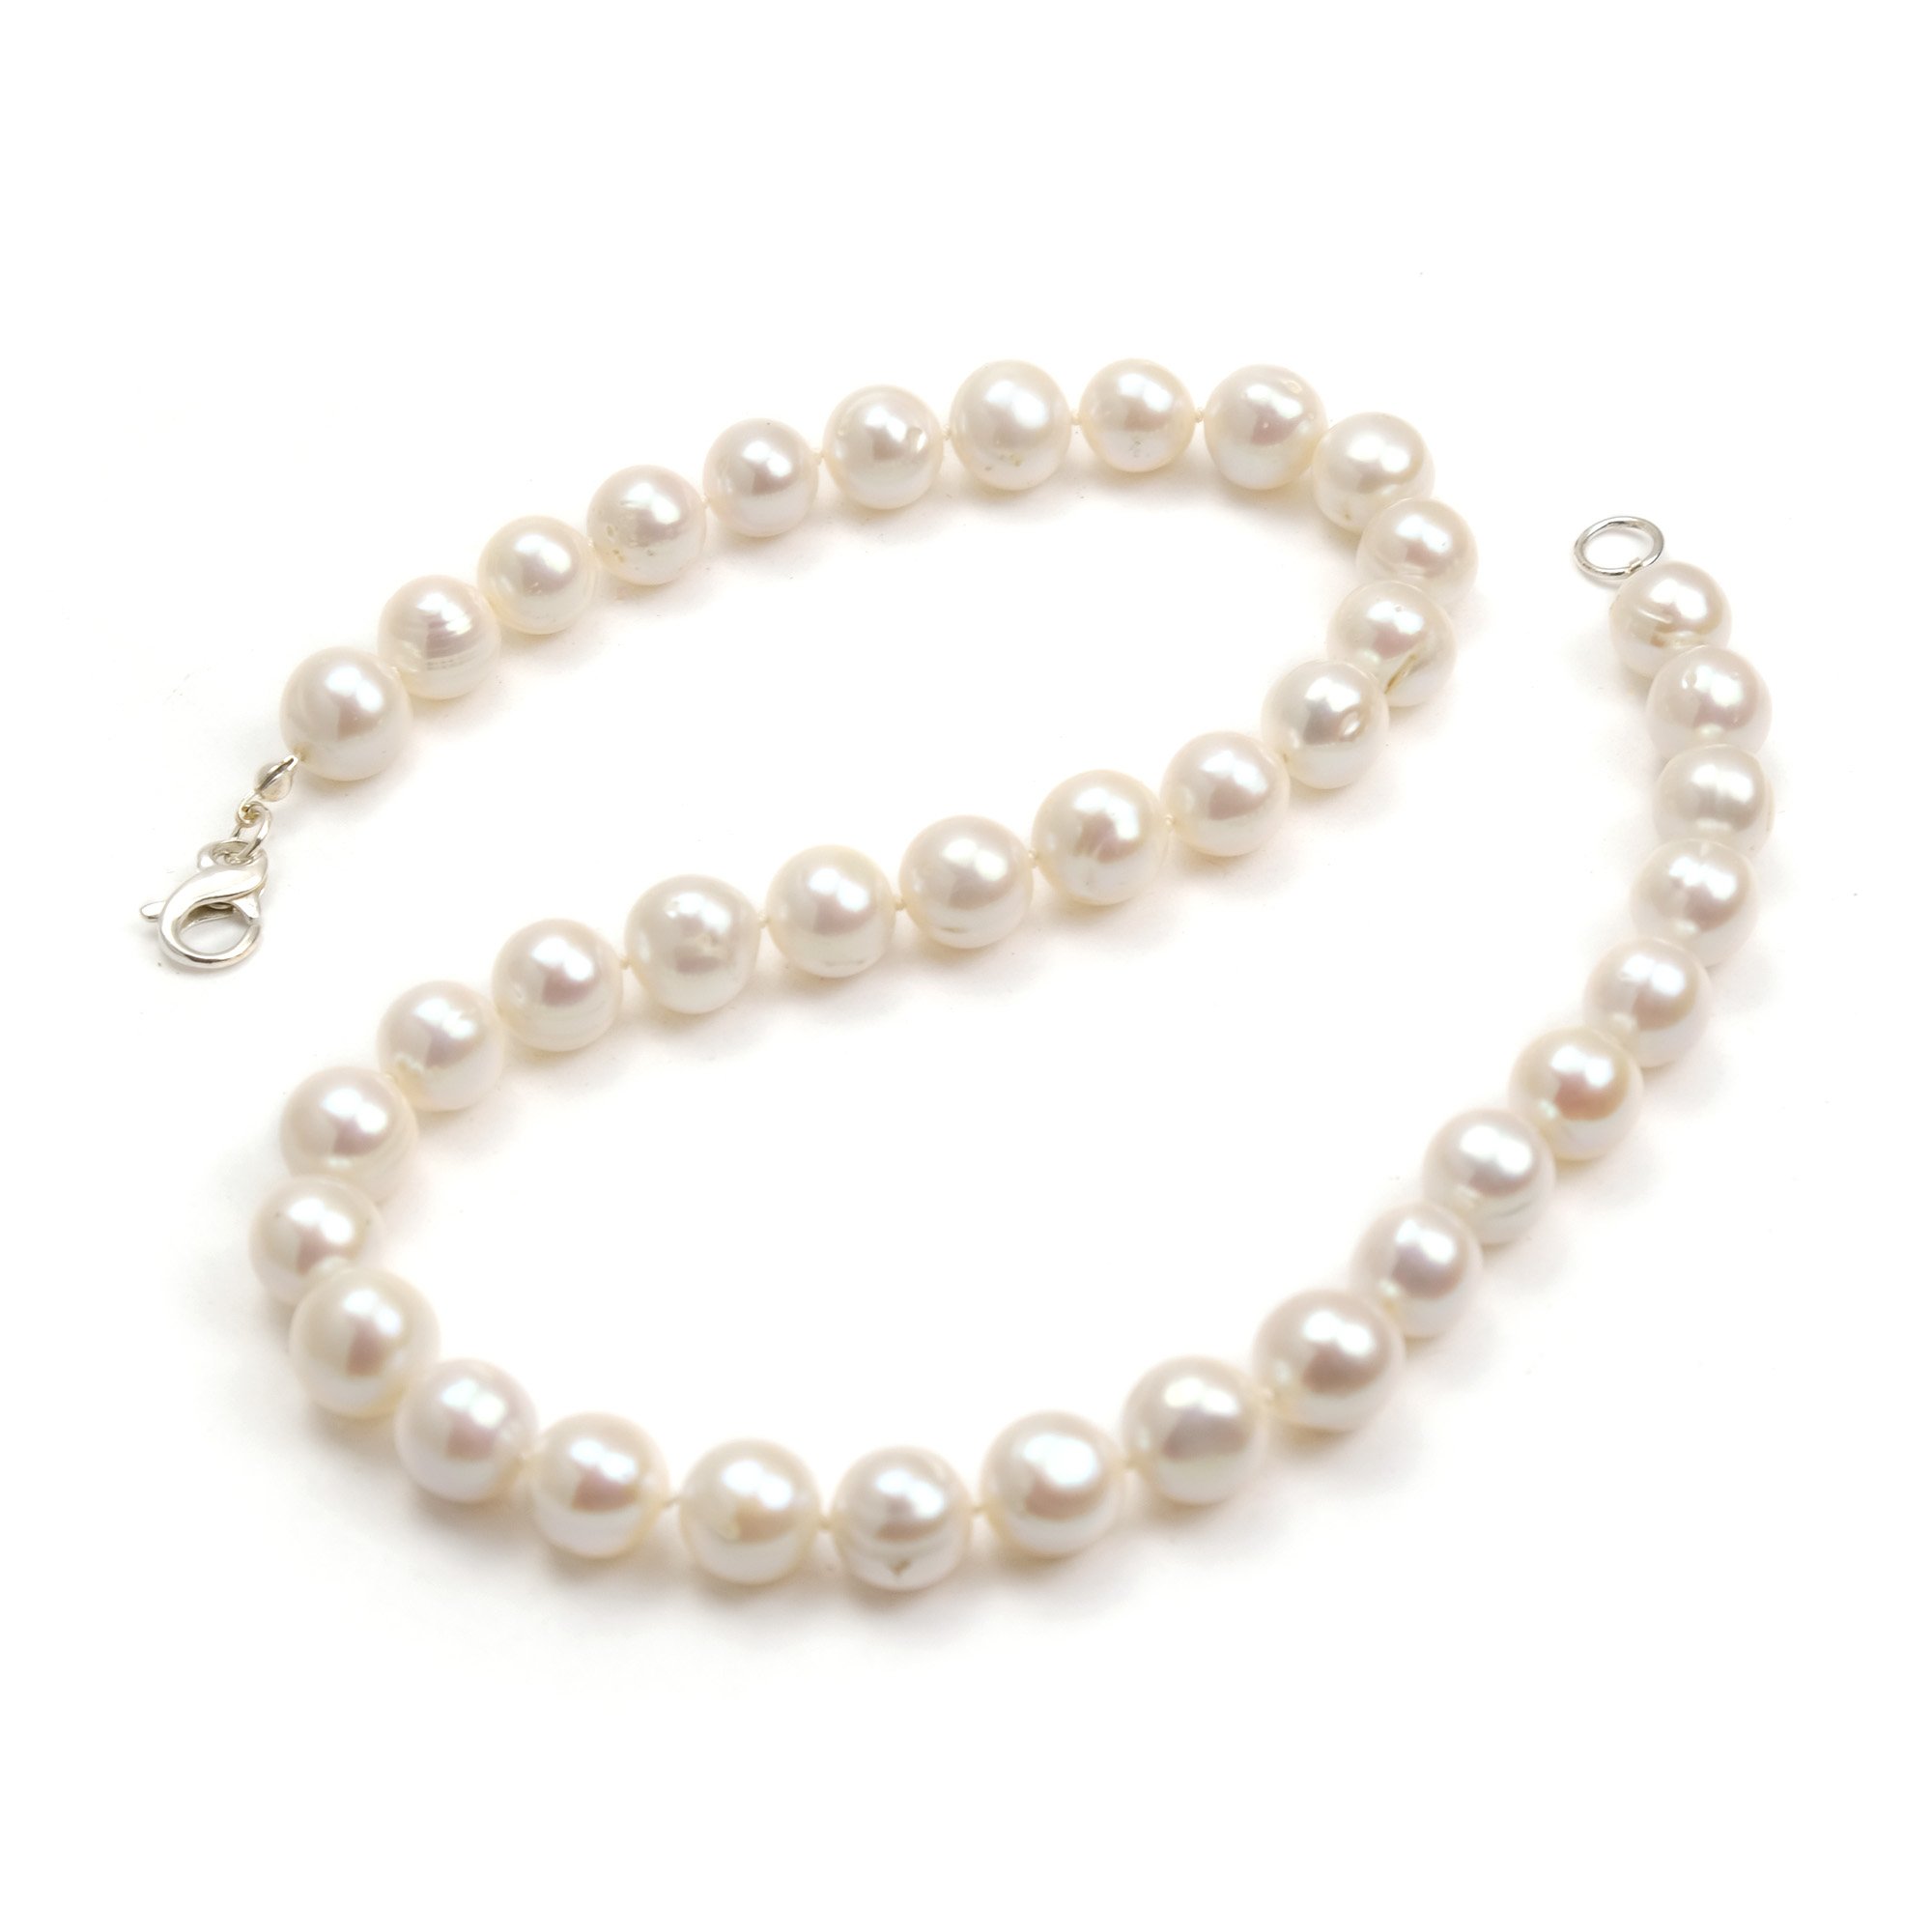 Diamond Princess Genuine 8.5-9mm Freshwater Cultured Pearl Necklace in Sterling Silver